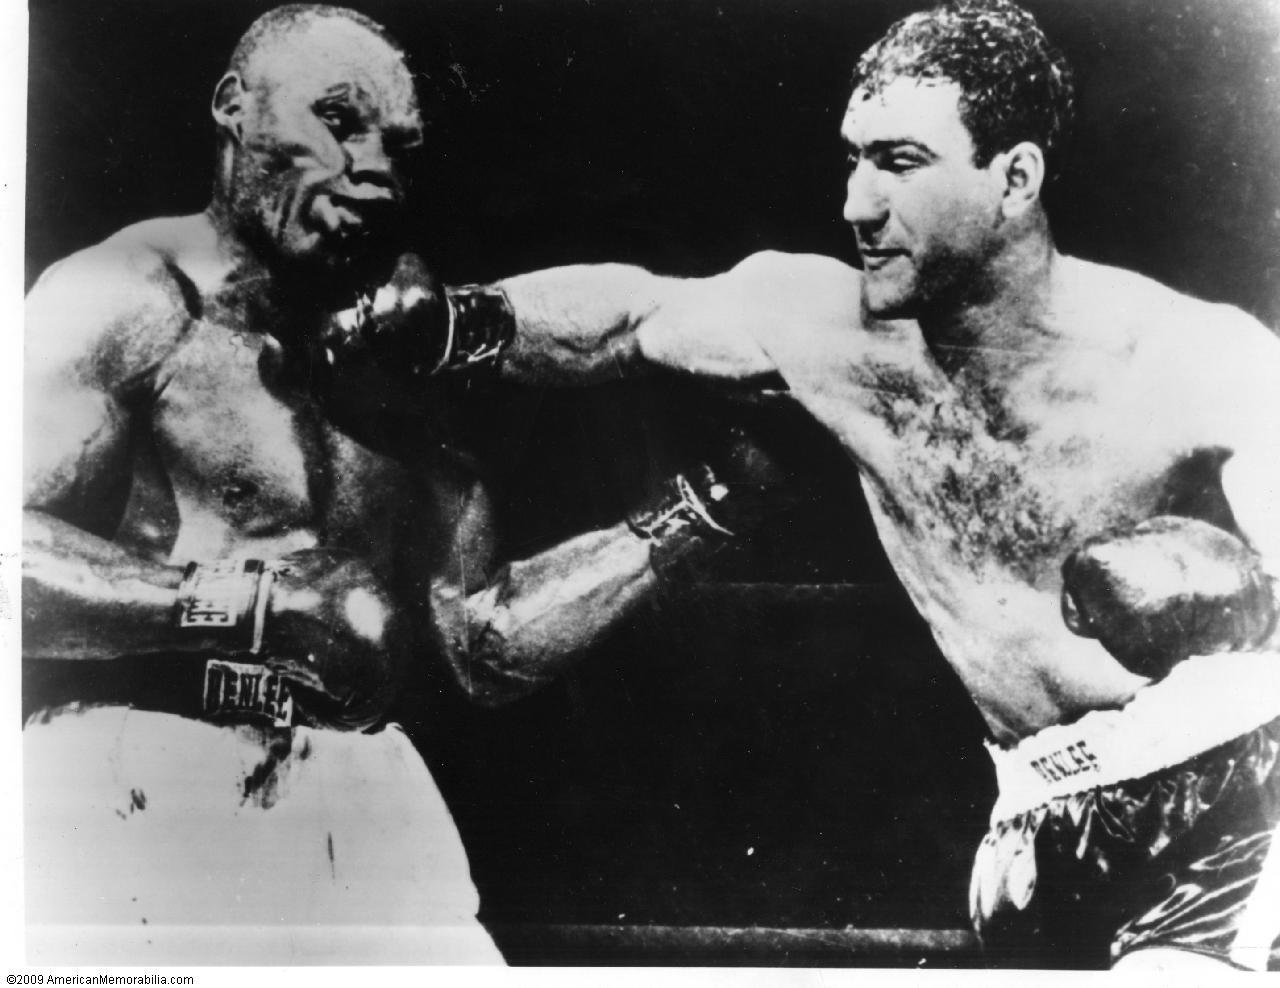 Rocky Marciano's quotes, famous and not much